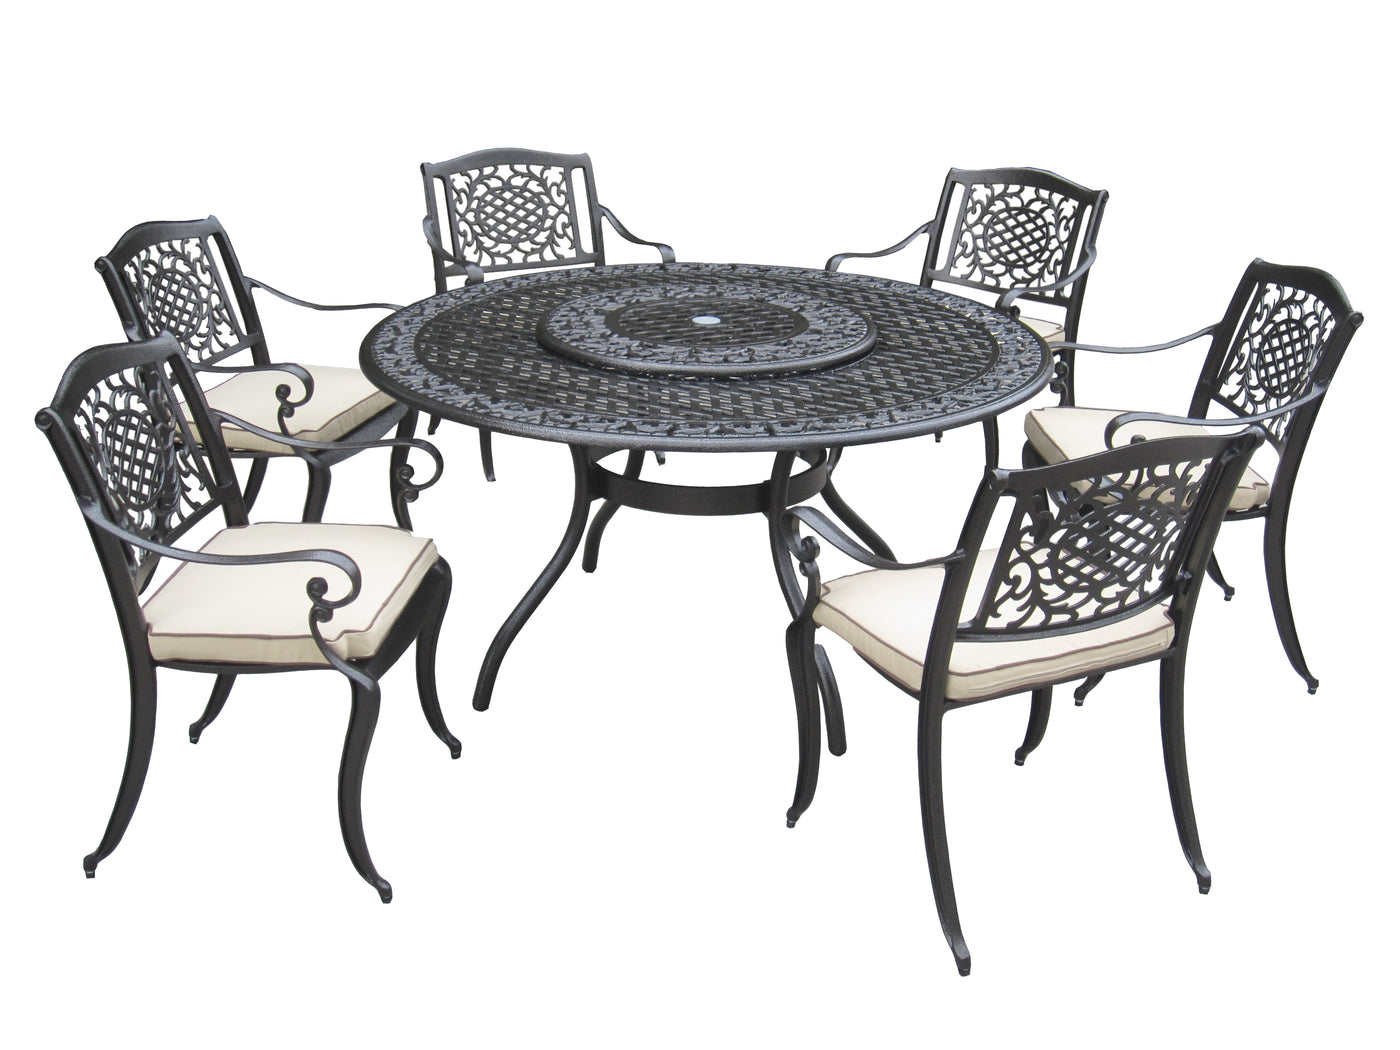 6 SEATER HAMMERED BRONZE CAST ALUMINIUM TABLE AND CHAIRS OUTDOOR FURNITURE